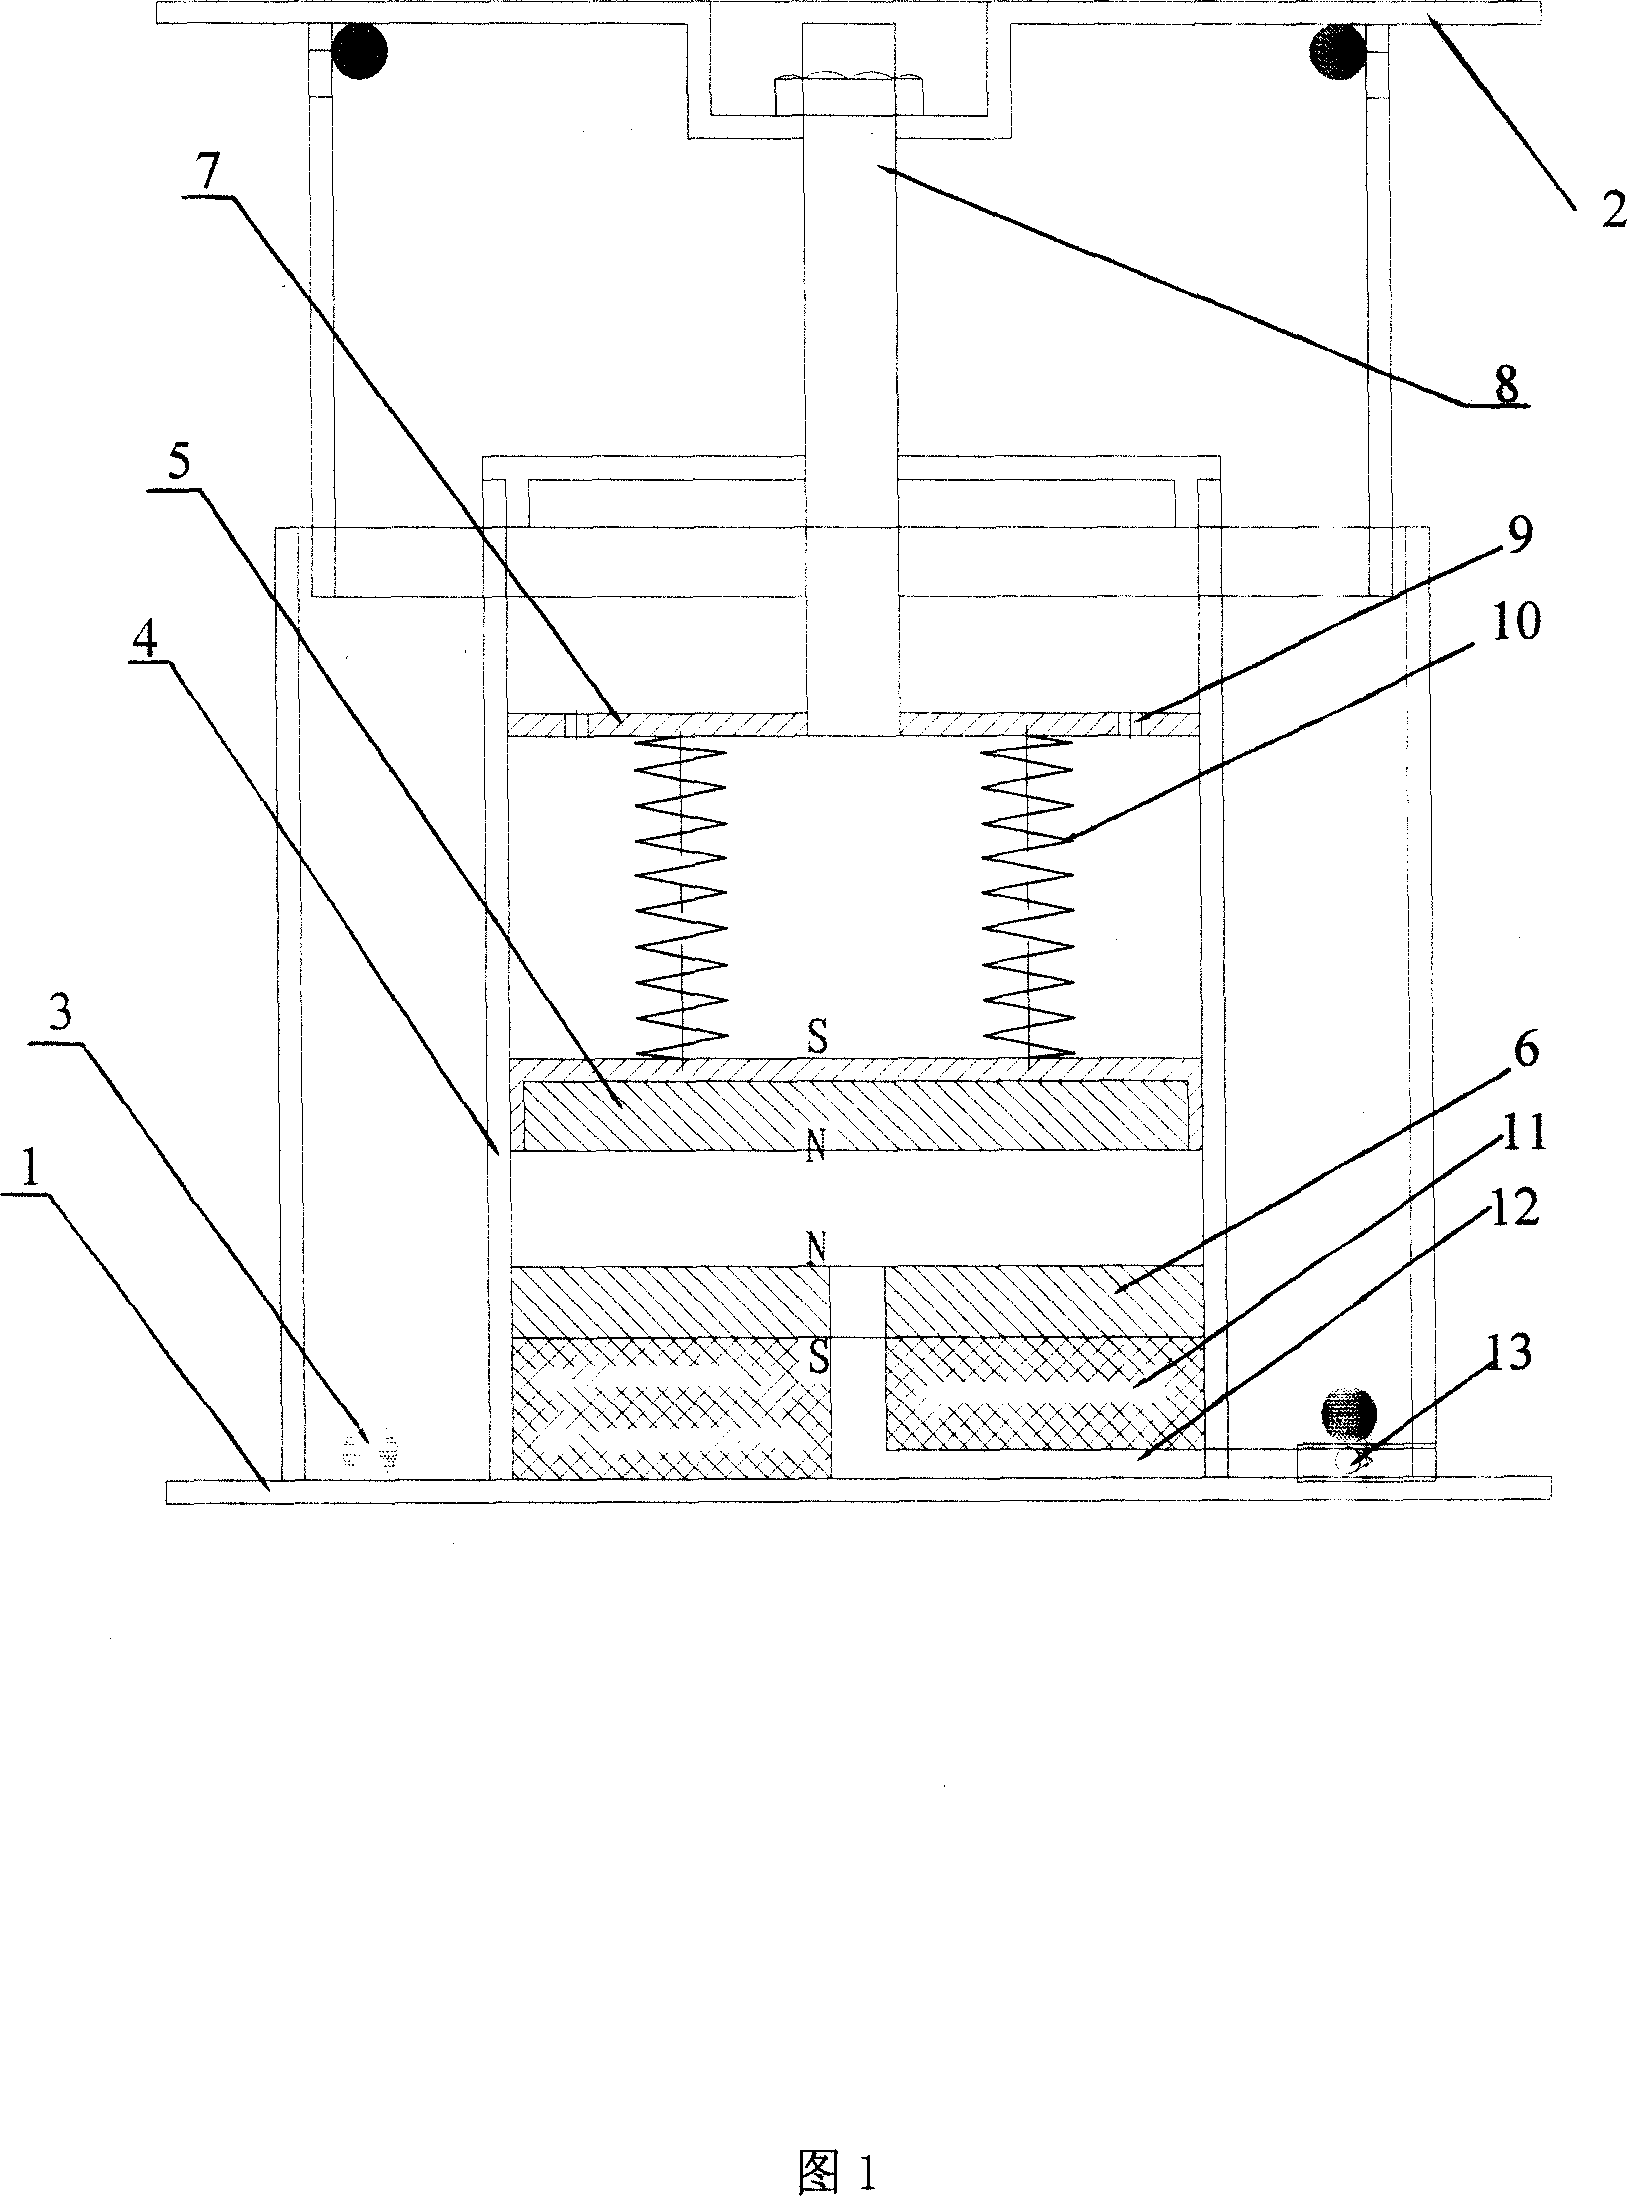 Composite magnetic damping vibration absorber